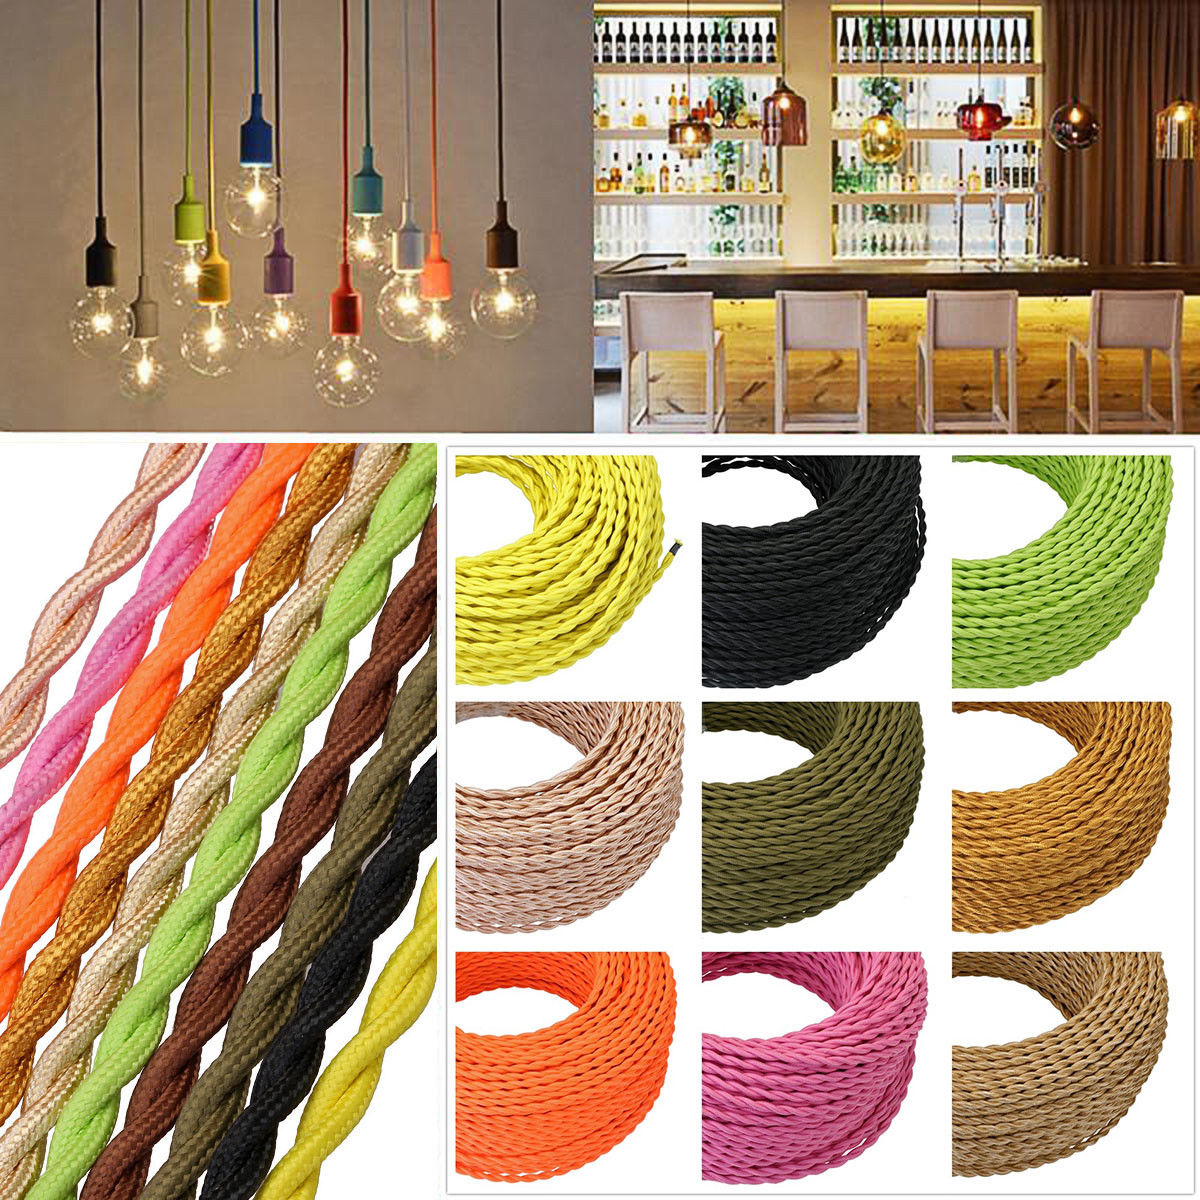 Fabric Cable twisted decorative wire.JPG